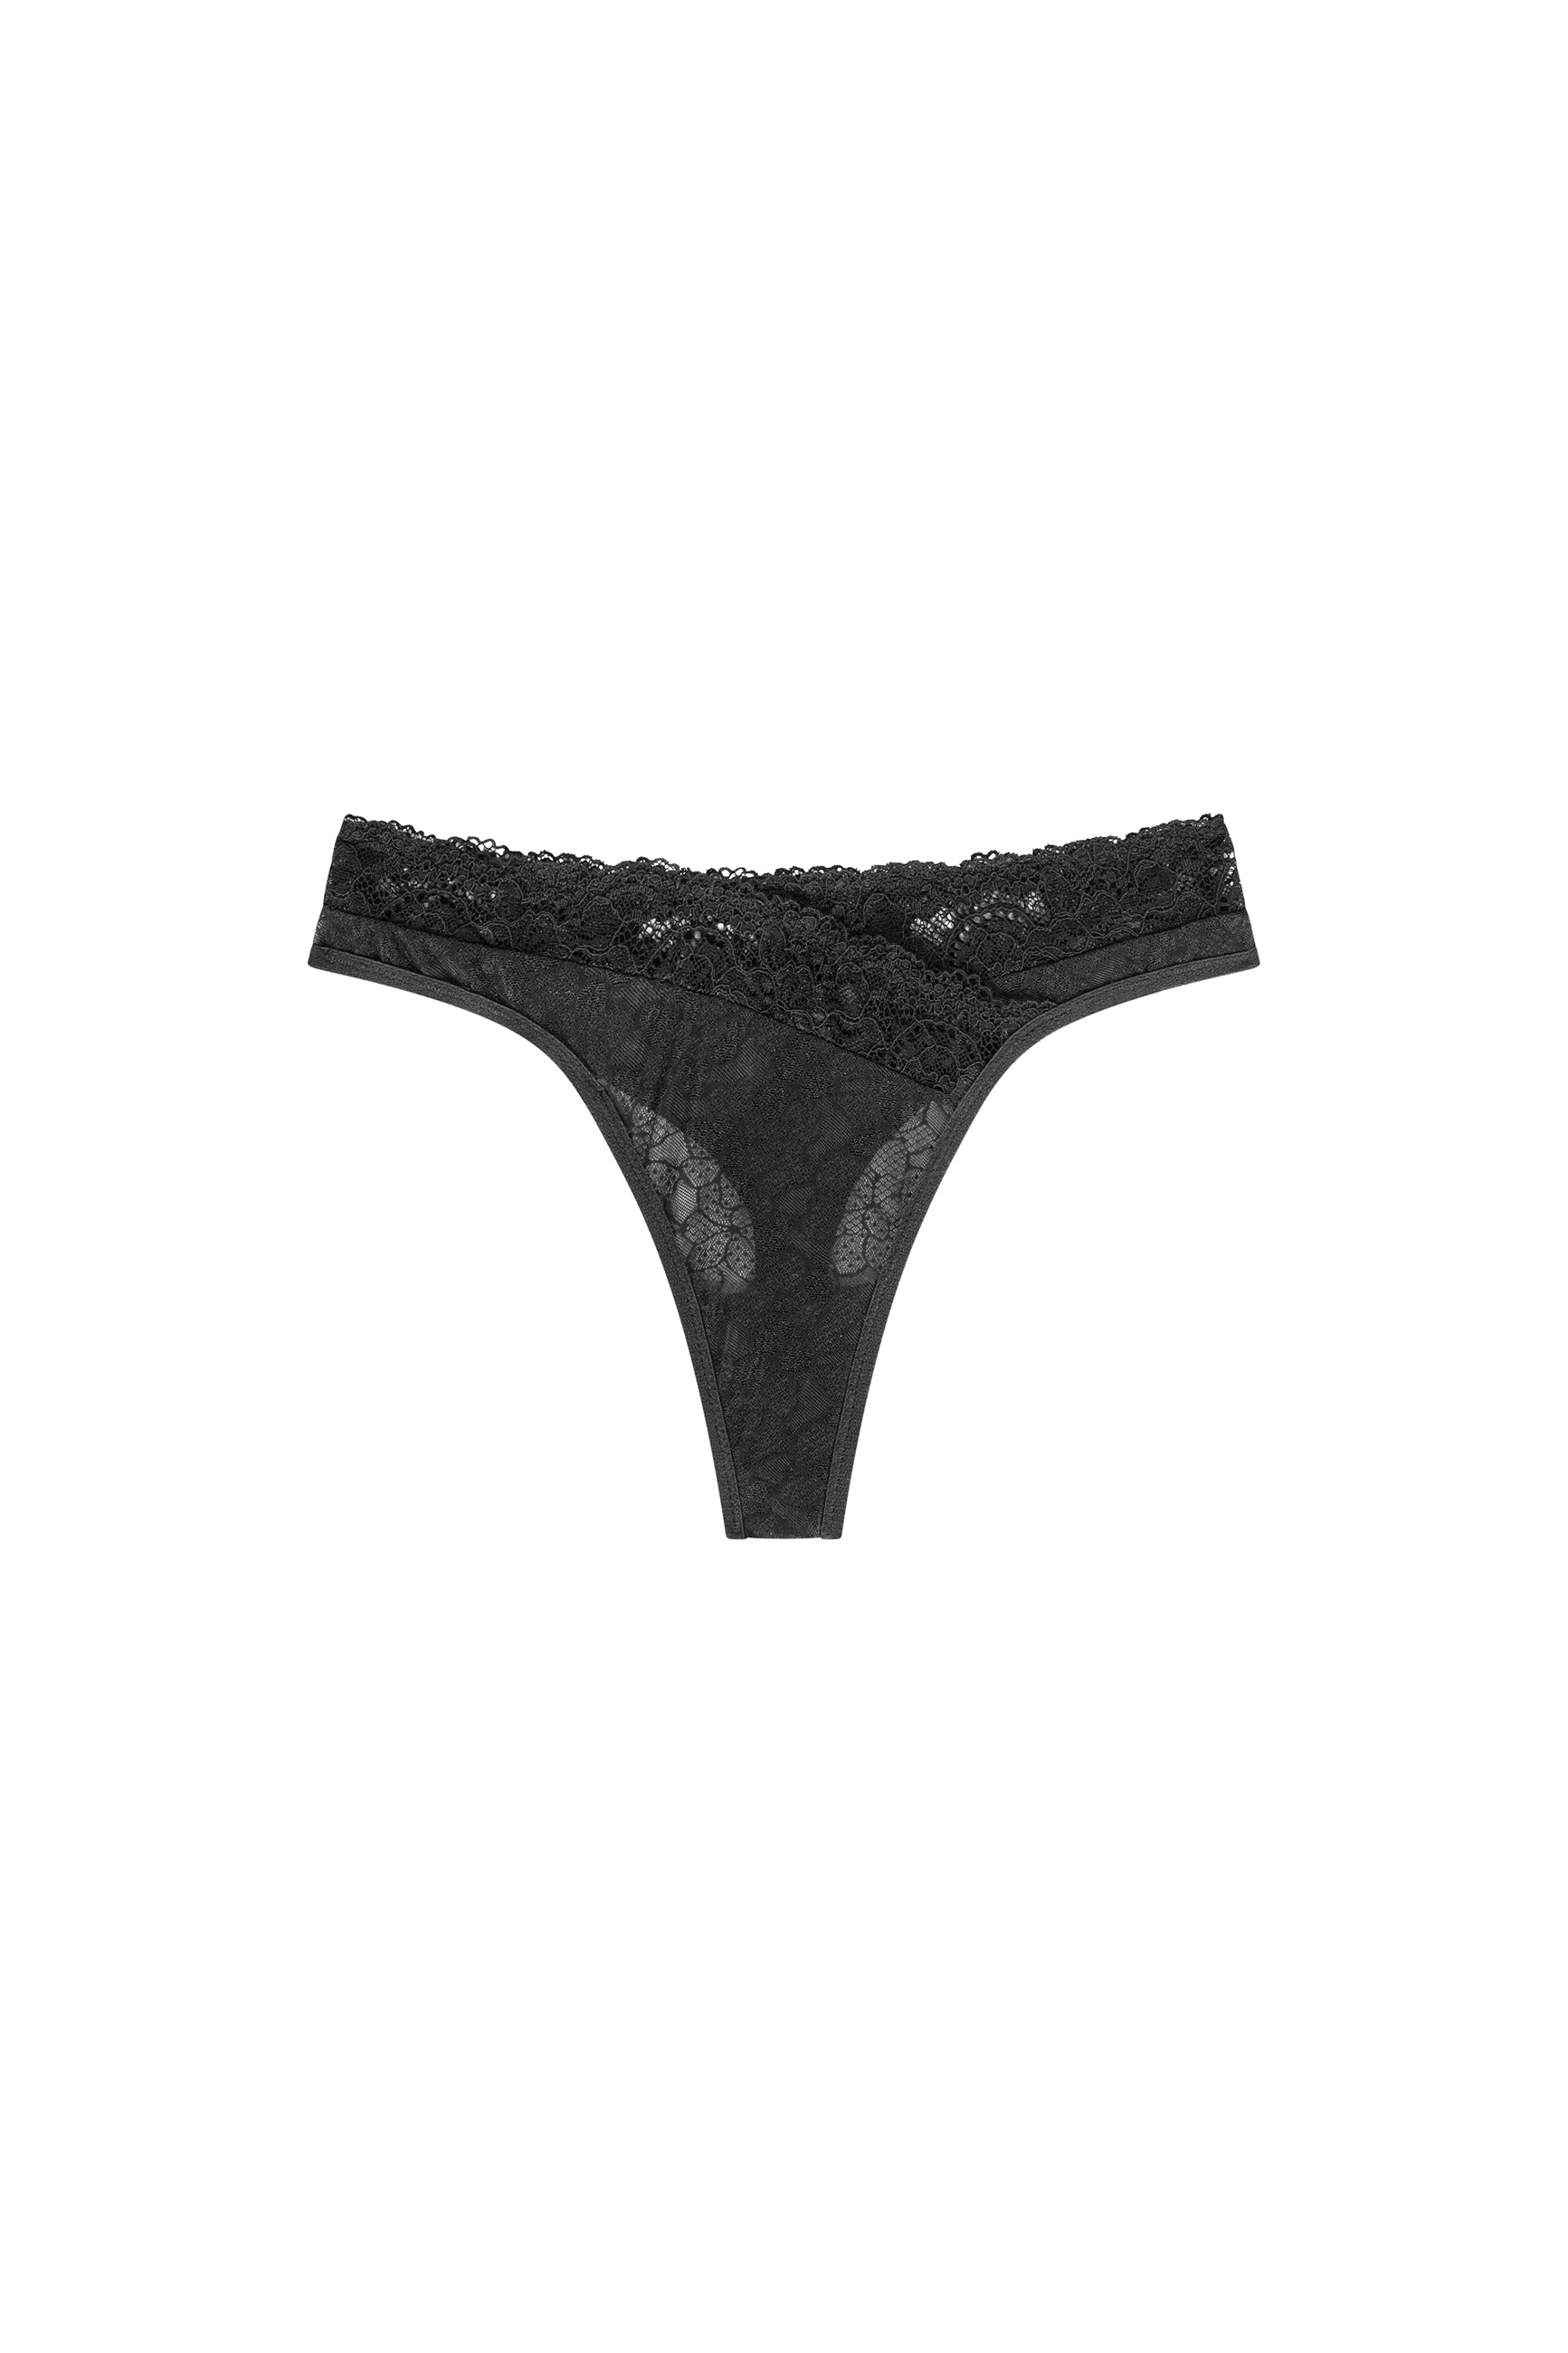 Black lace sustainable thong